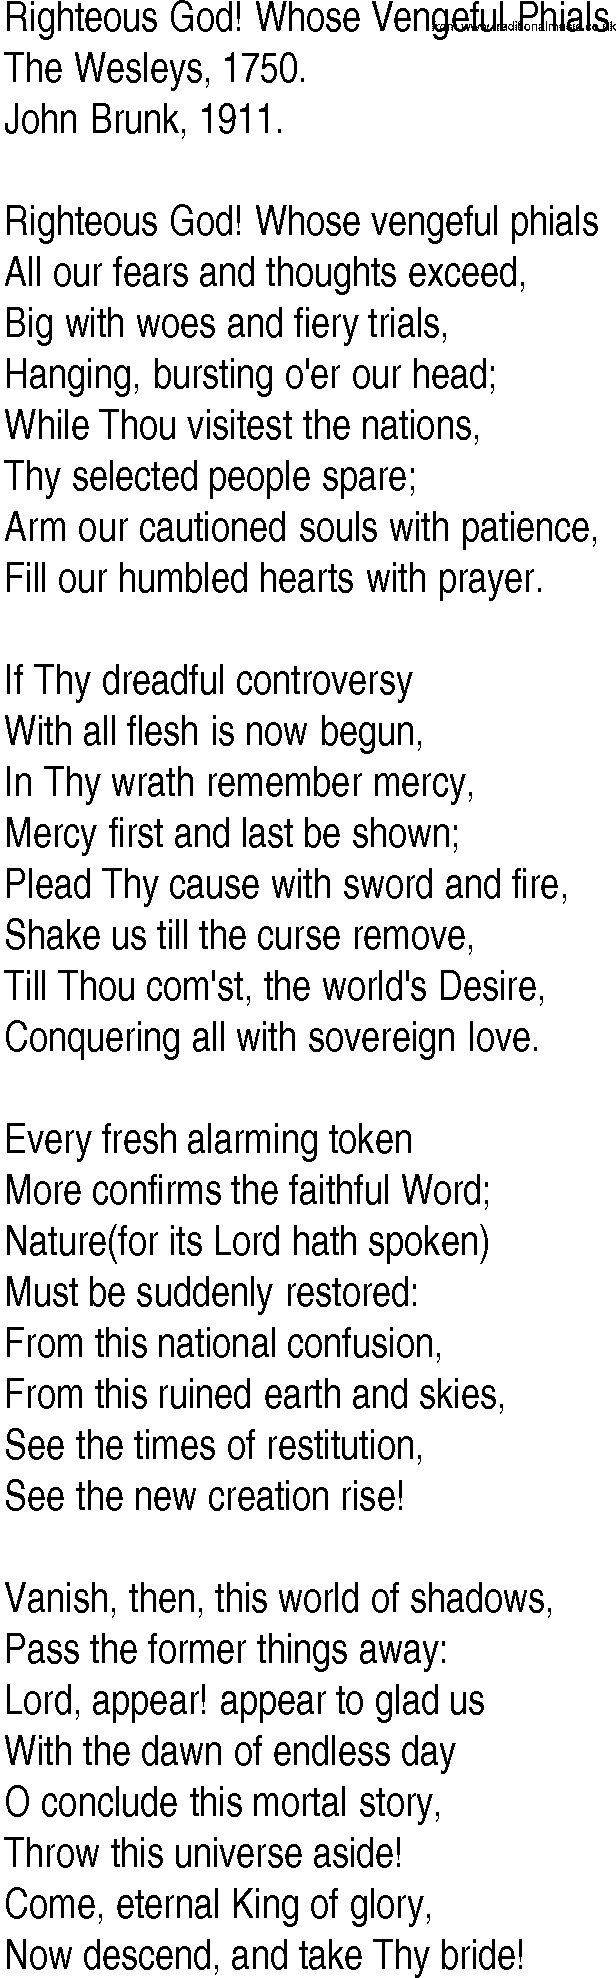 Hymn and Gospel Song: Righteous God! Whose Vengeful Phials by The Wesleys lyrics